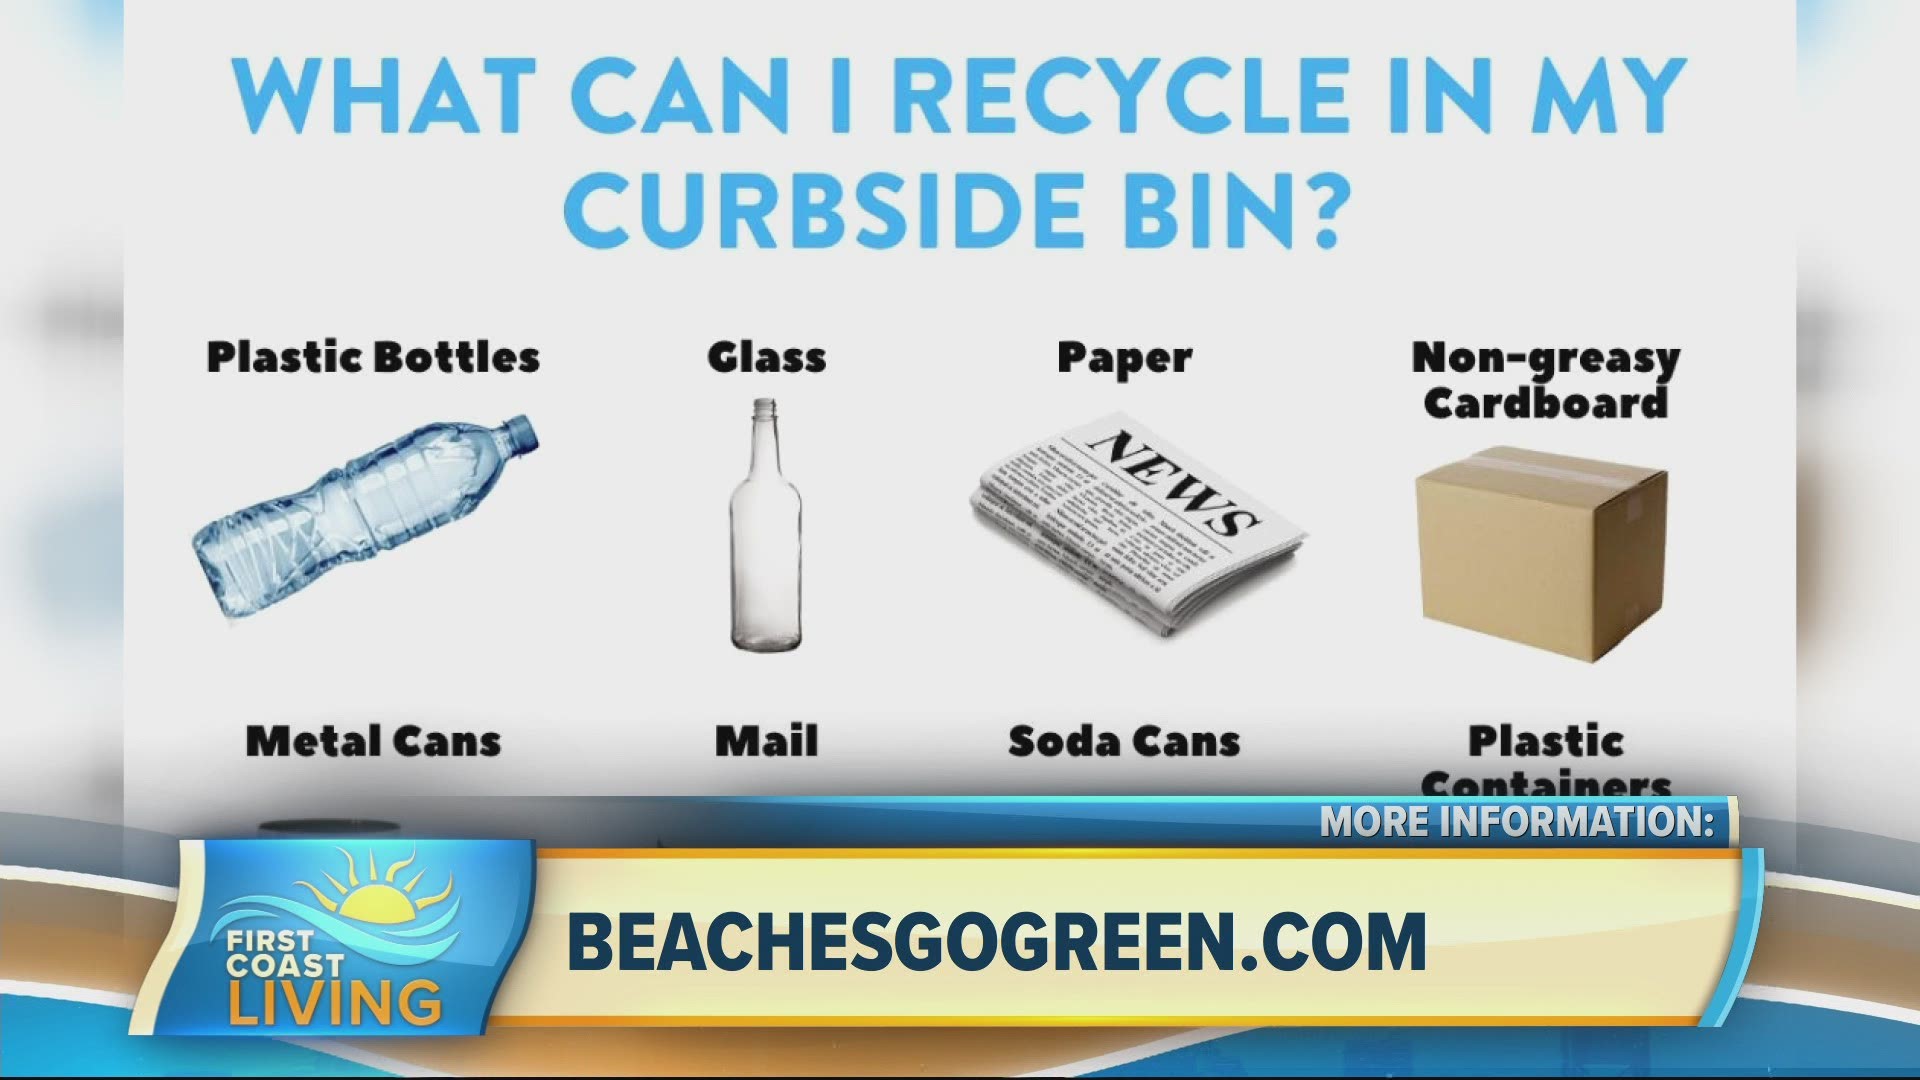 Recycling can seem daunting, but Alex found some great tips for you to follow!